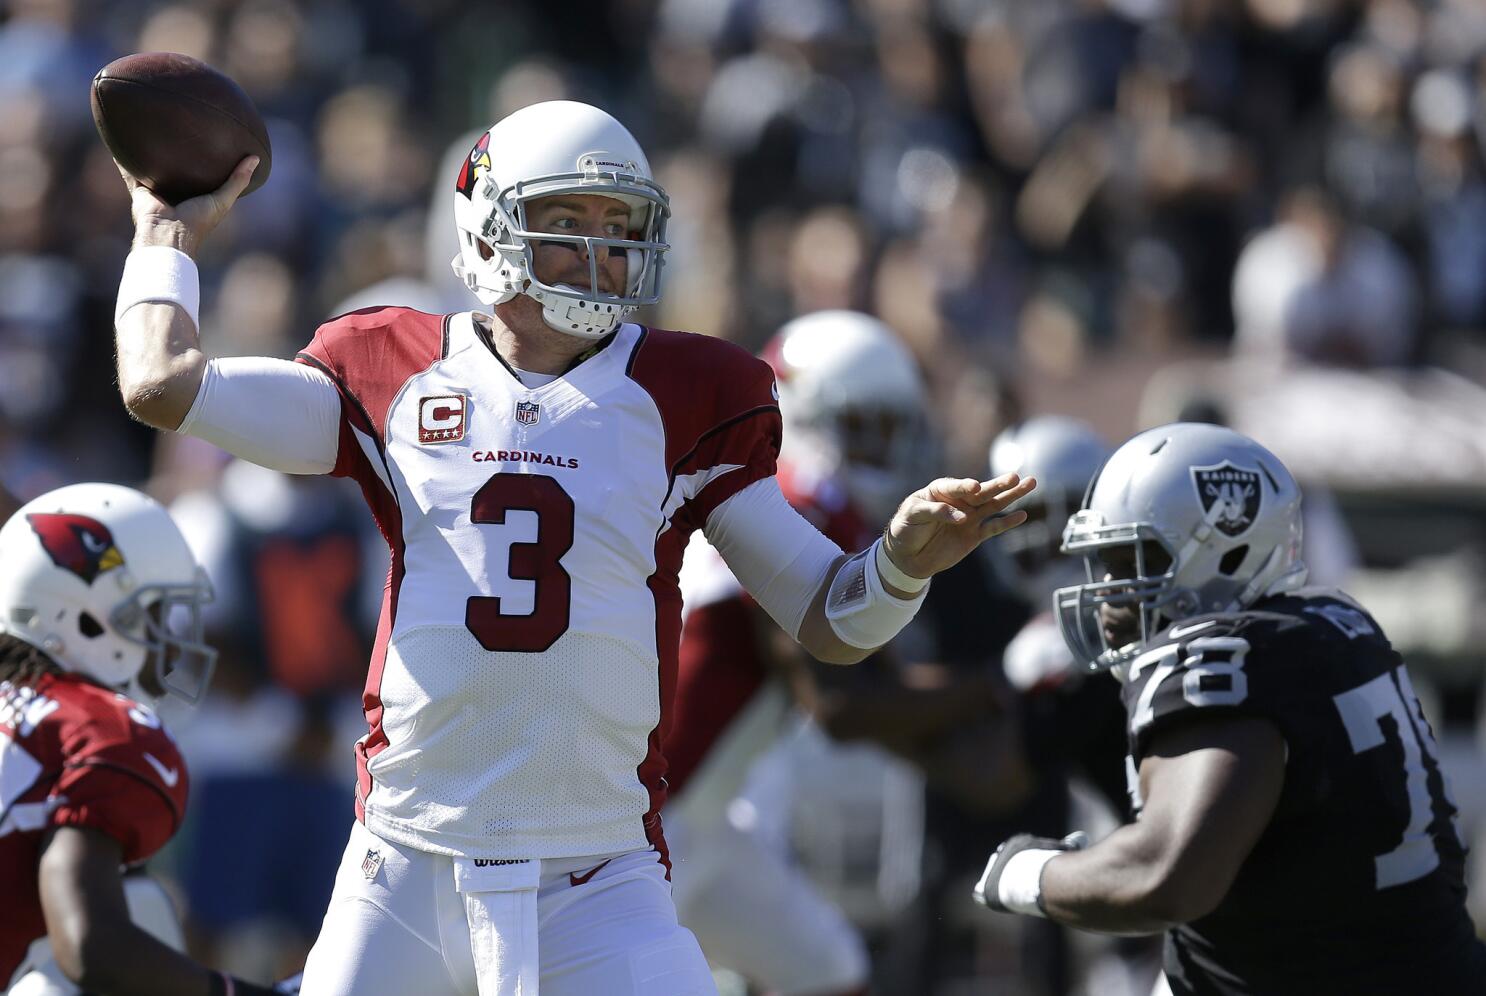 Trojans in the NFL: Carson Palmer leads Arizona Cardinals to victory - Los  Angeles Times